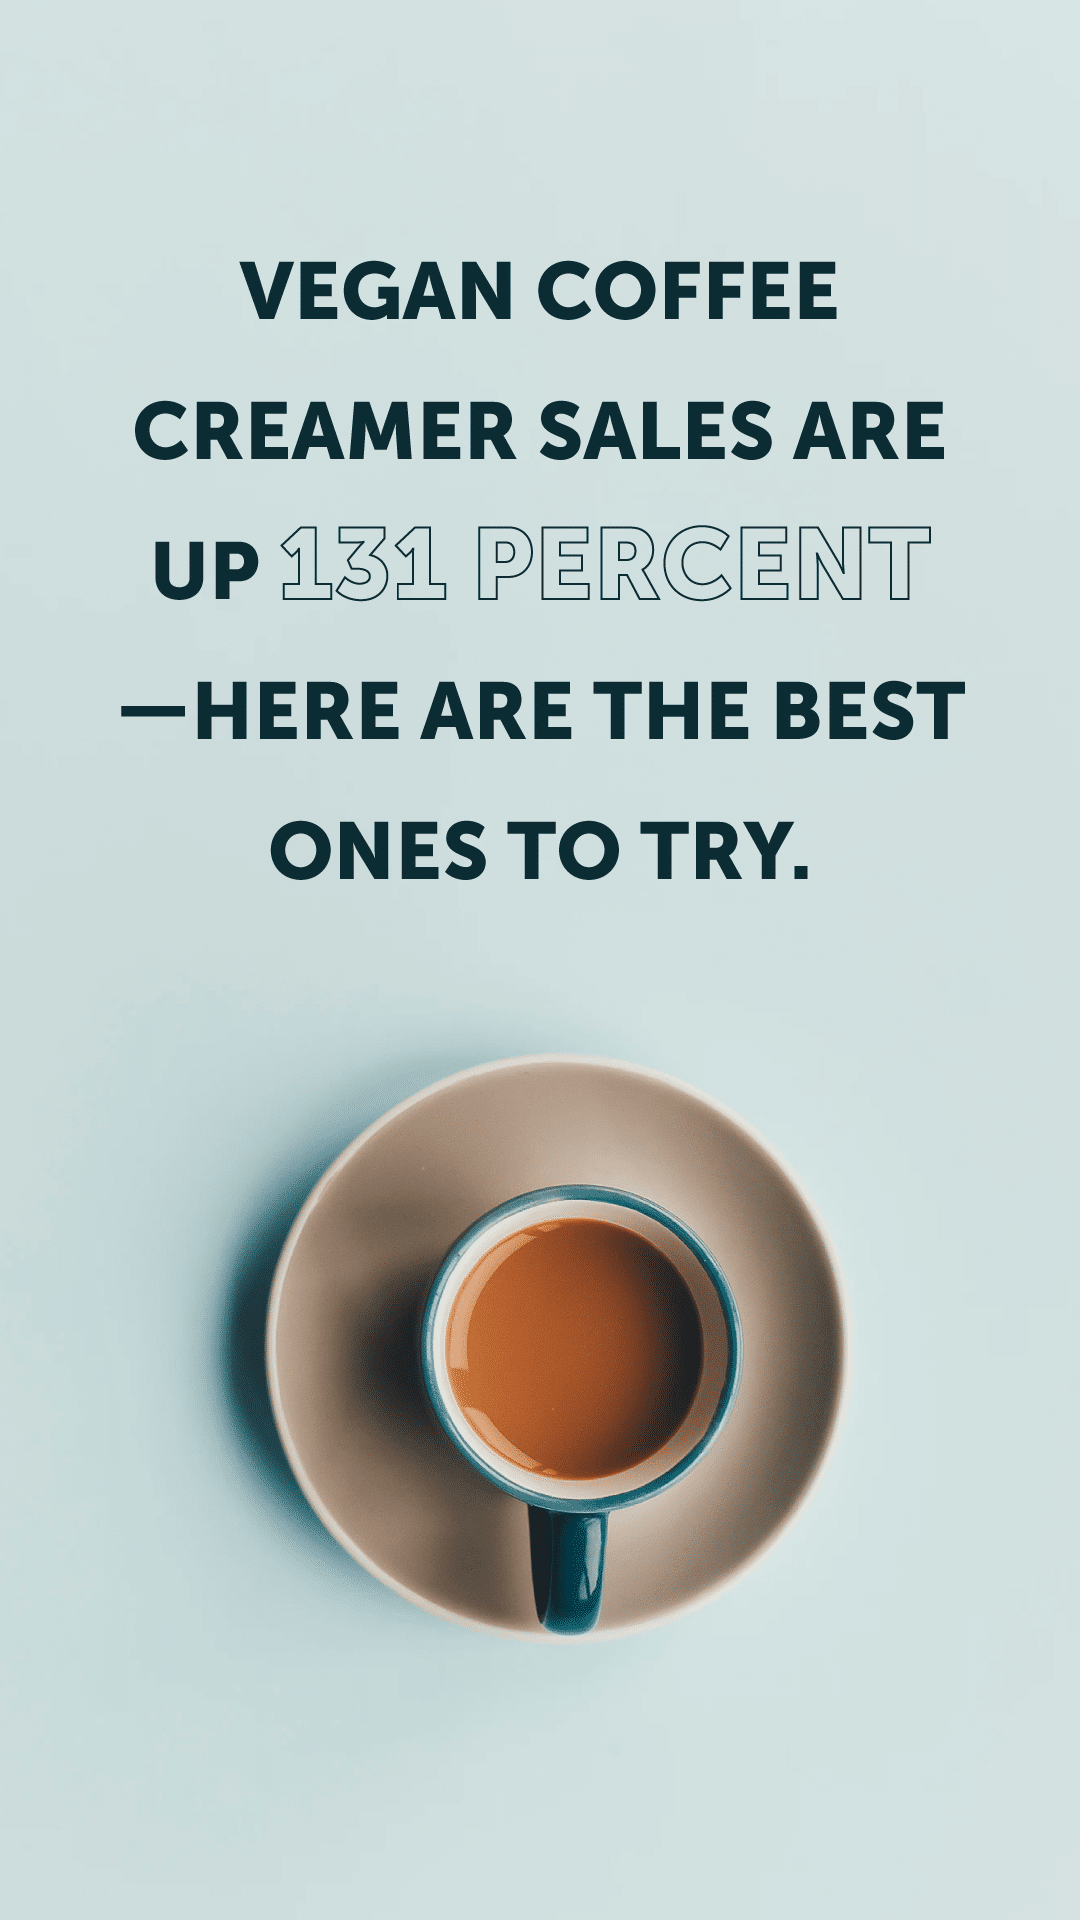 Vegan Coffee Creamer Sales Are Up 131 Percent—Here Are the Best Ones to Try.